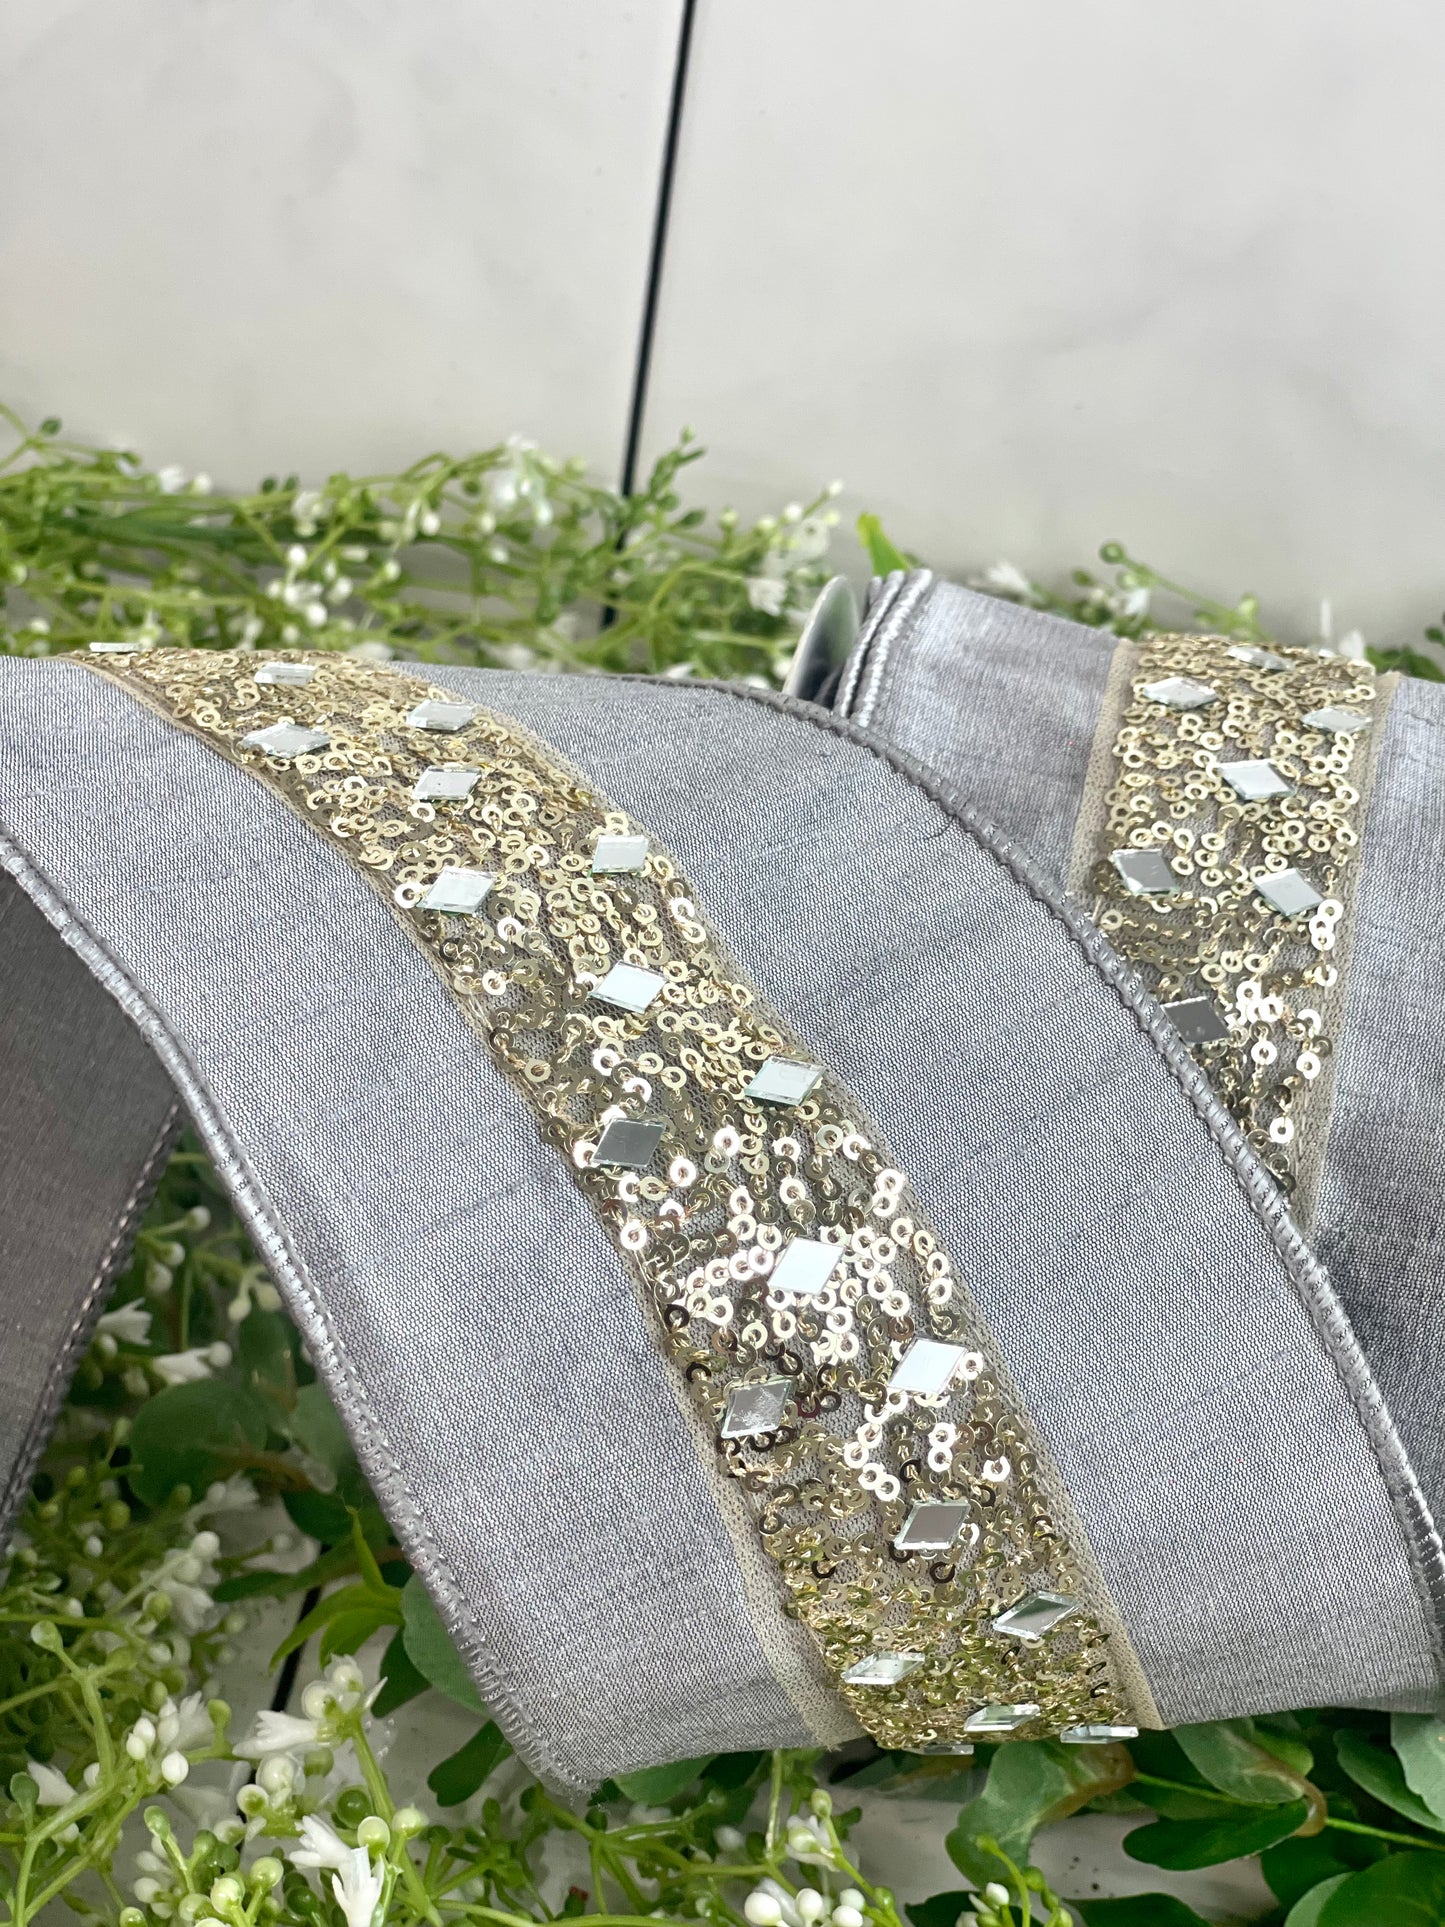 4 Inch By 10 Yard Gray Faux Dupioni Ribbon With Silver And Gold Mirror Lace Center With Platinum Edge